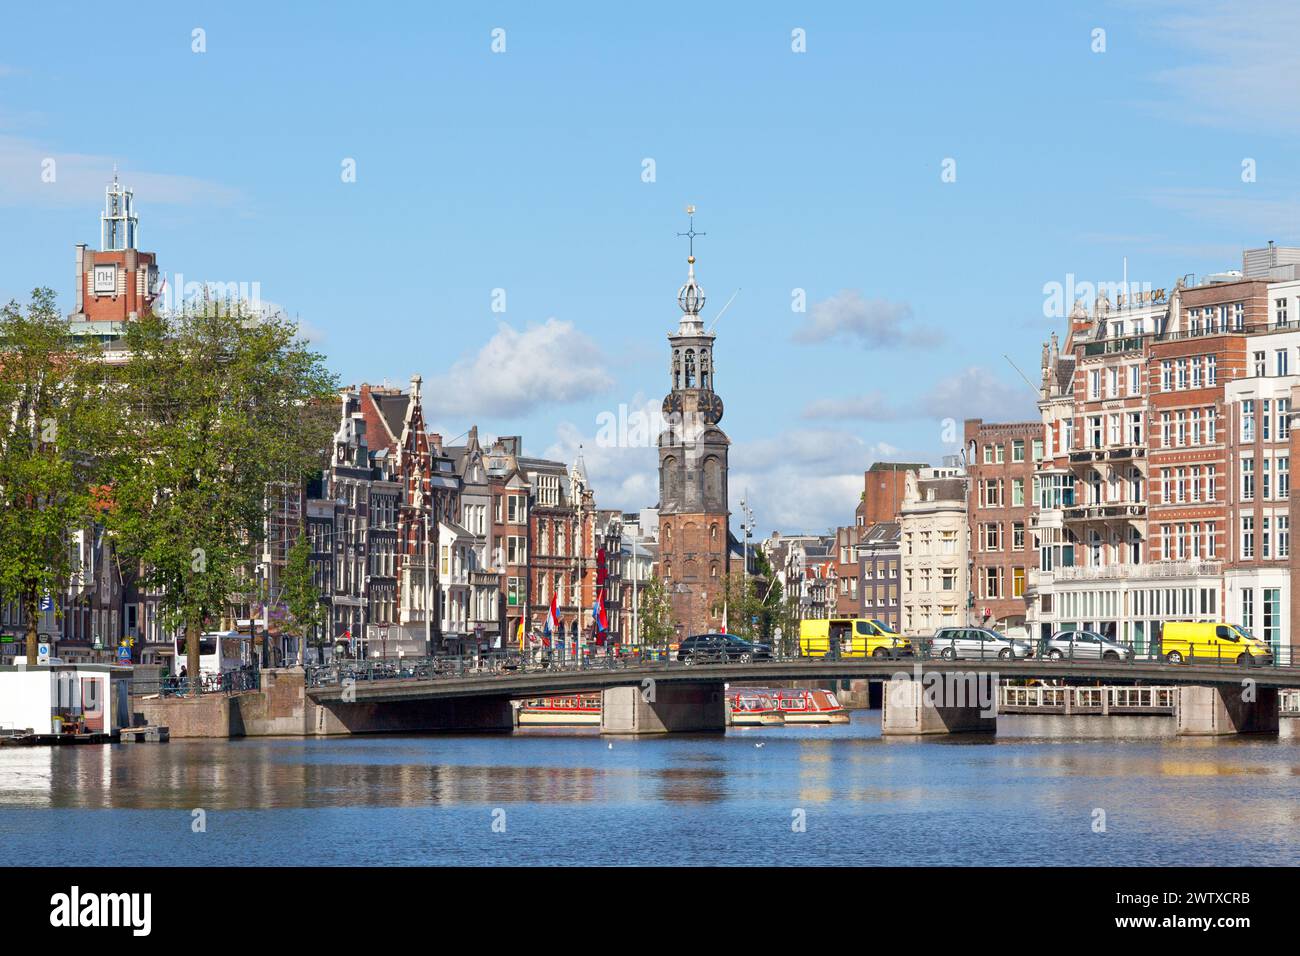 Amsterdam, Netherlands - July 02 2019: The Munttoren ('Mint Tower') or Munt is a tower standing on the busy Muntplein square, where the Amstel river a Stock Photo